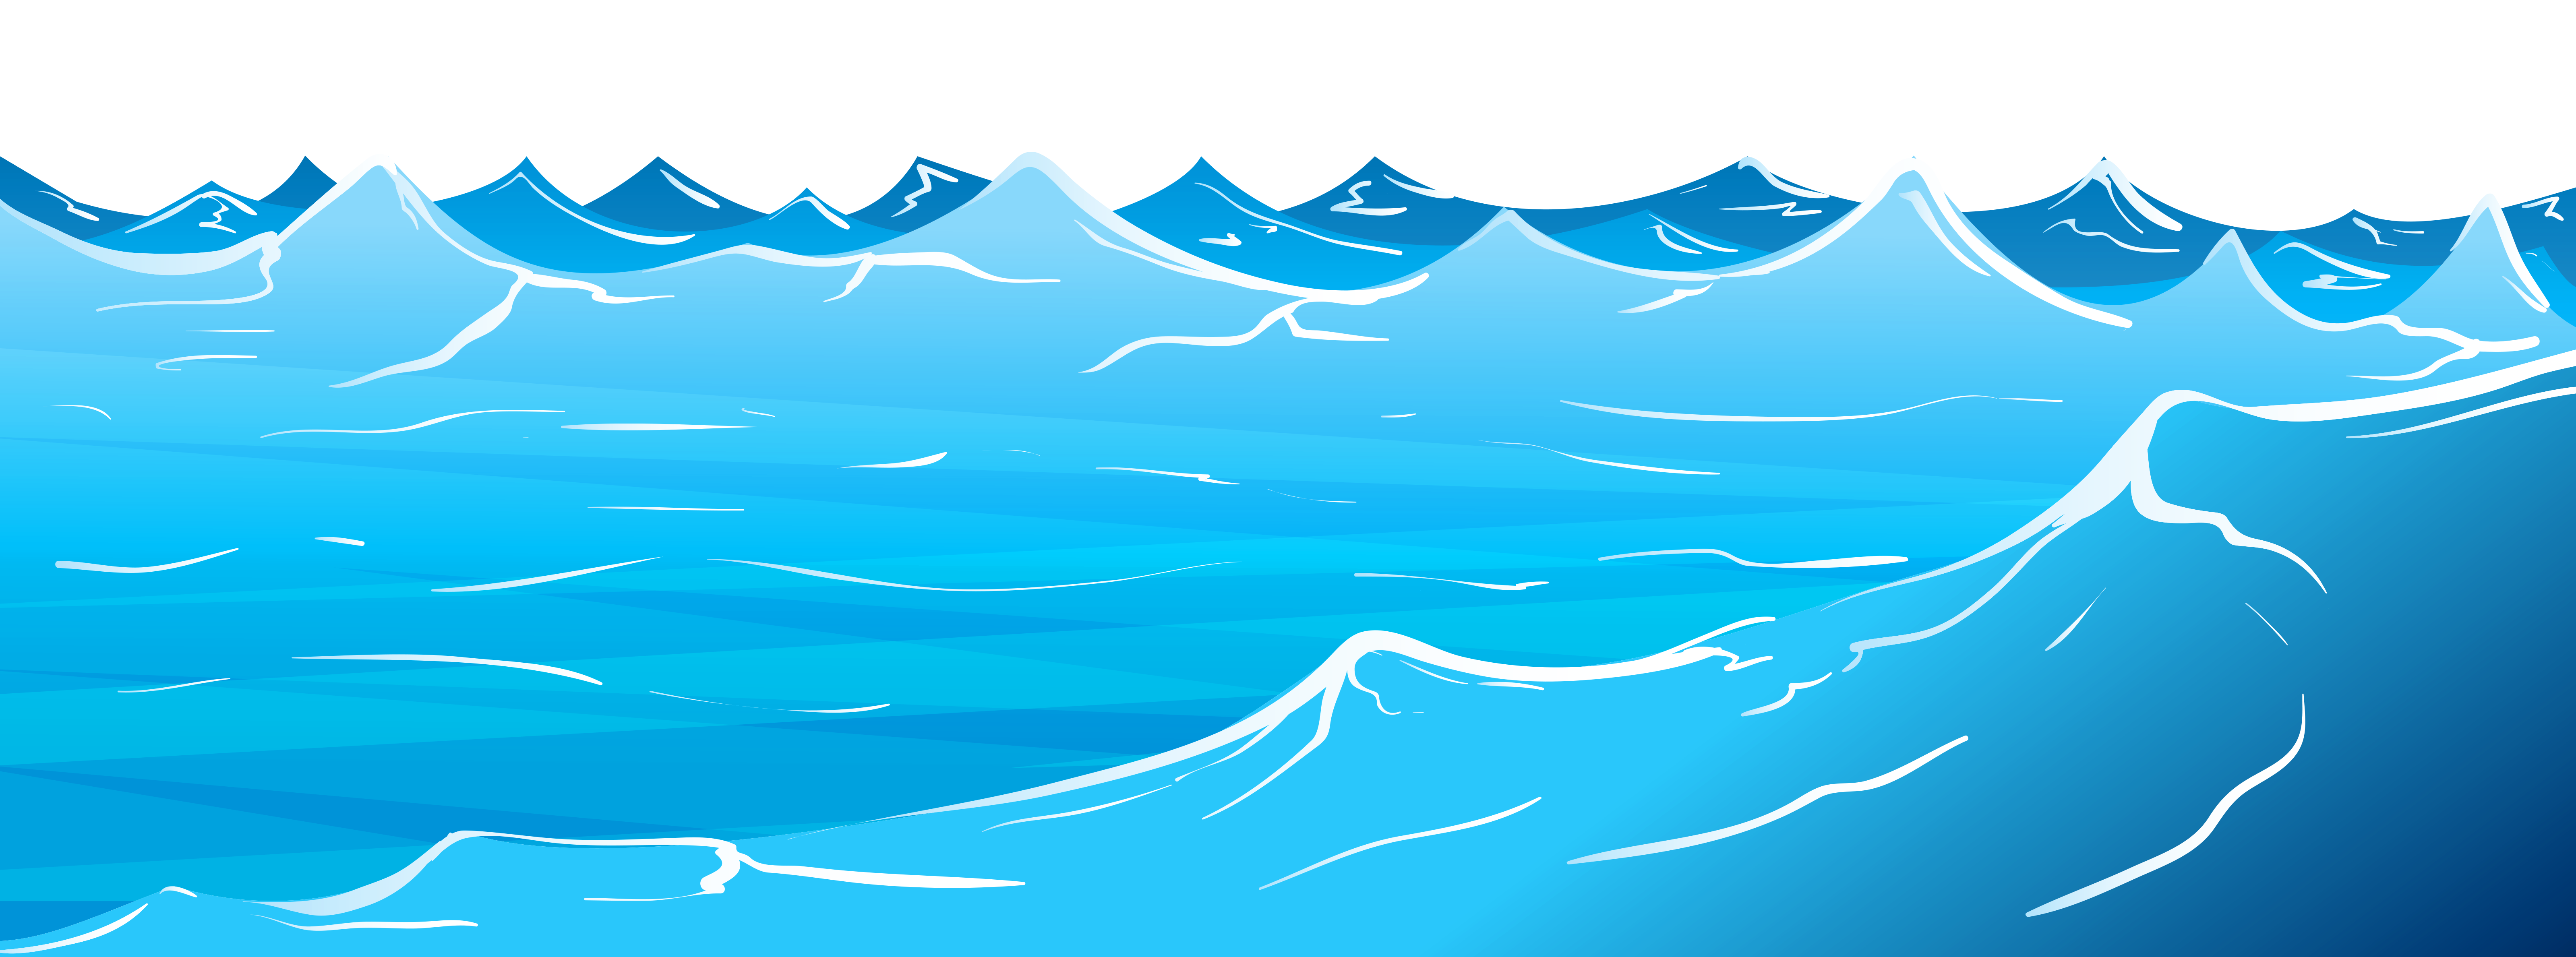 What is in ocean. Youtube clipart nature